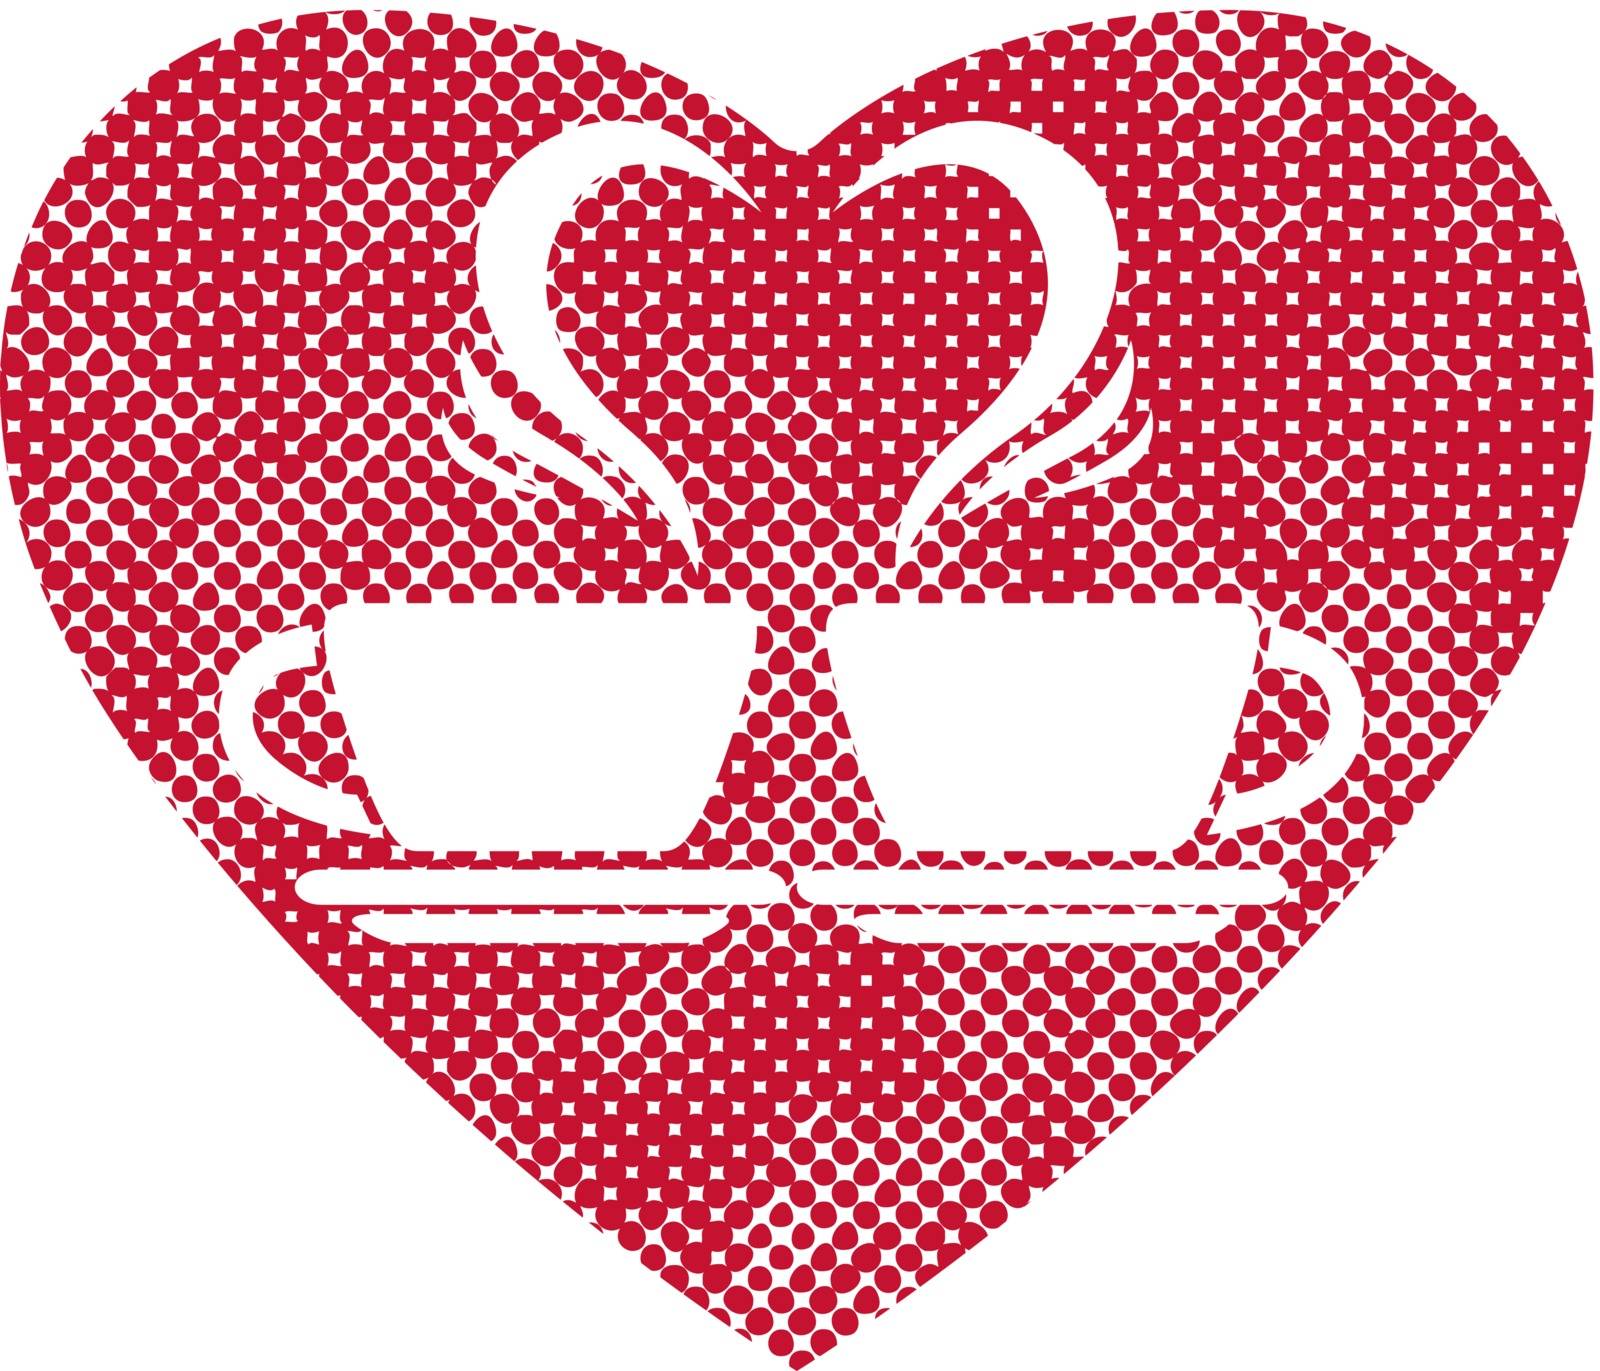 Romantic dating icon with two coffee cups and steam creates a heart, vector, with pixel print halftone dots texture.